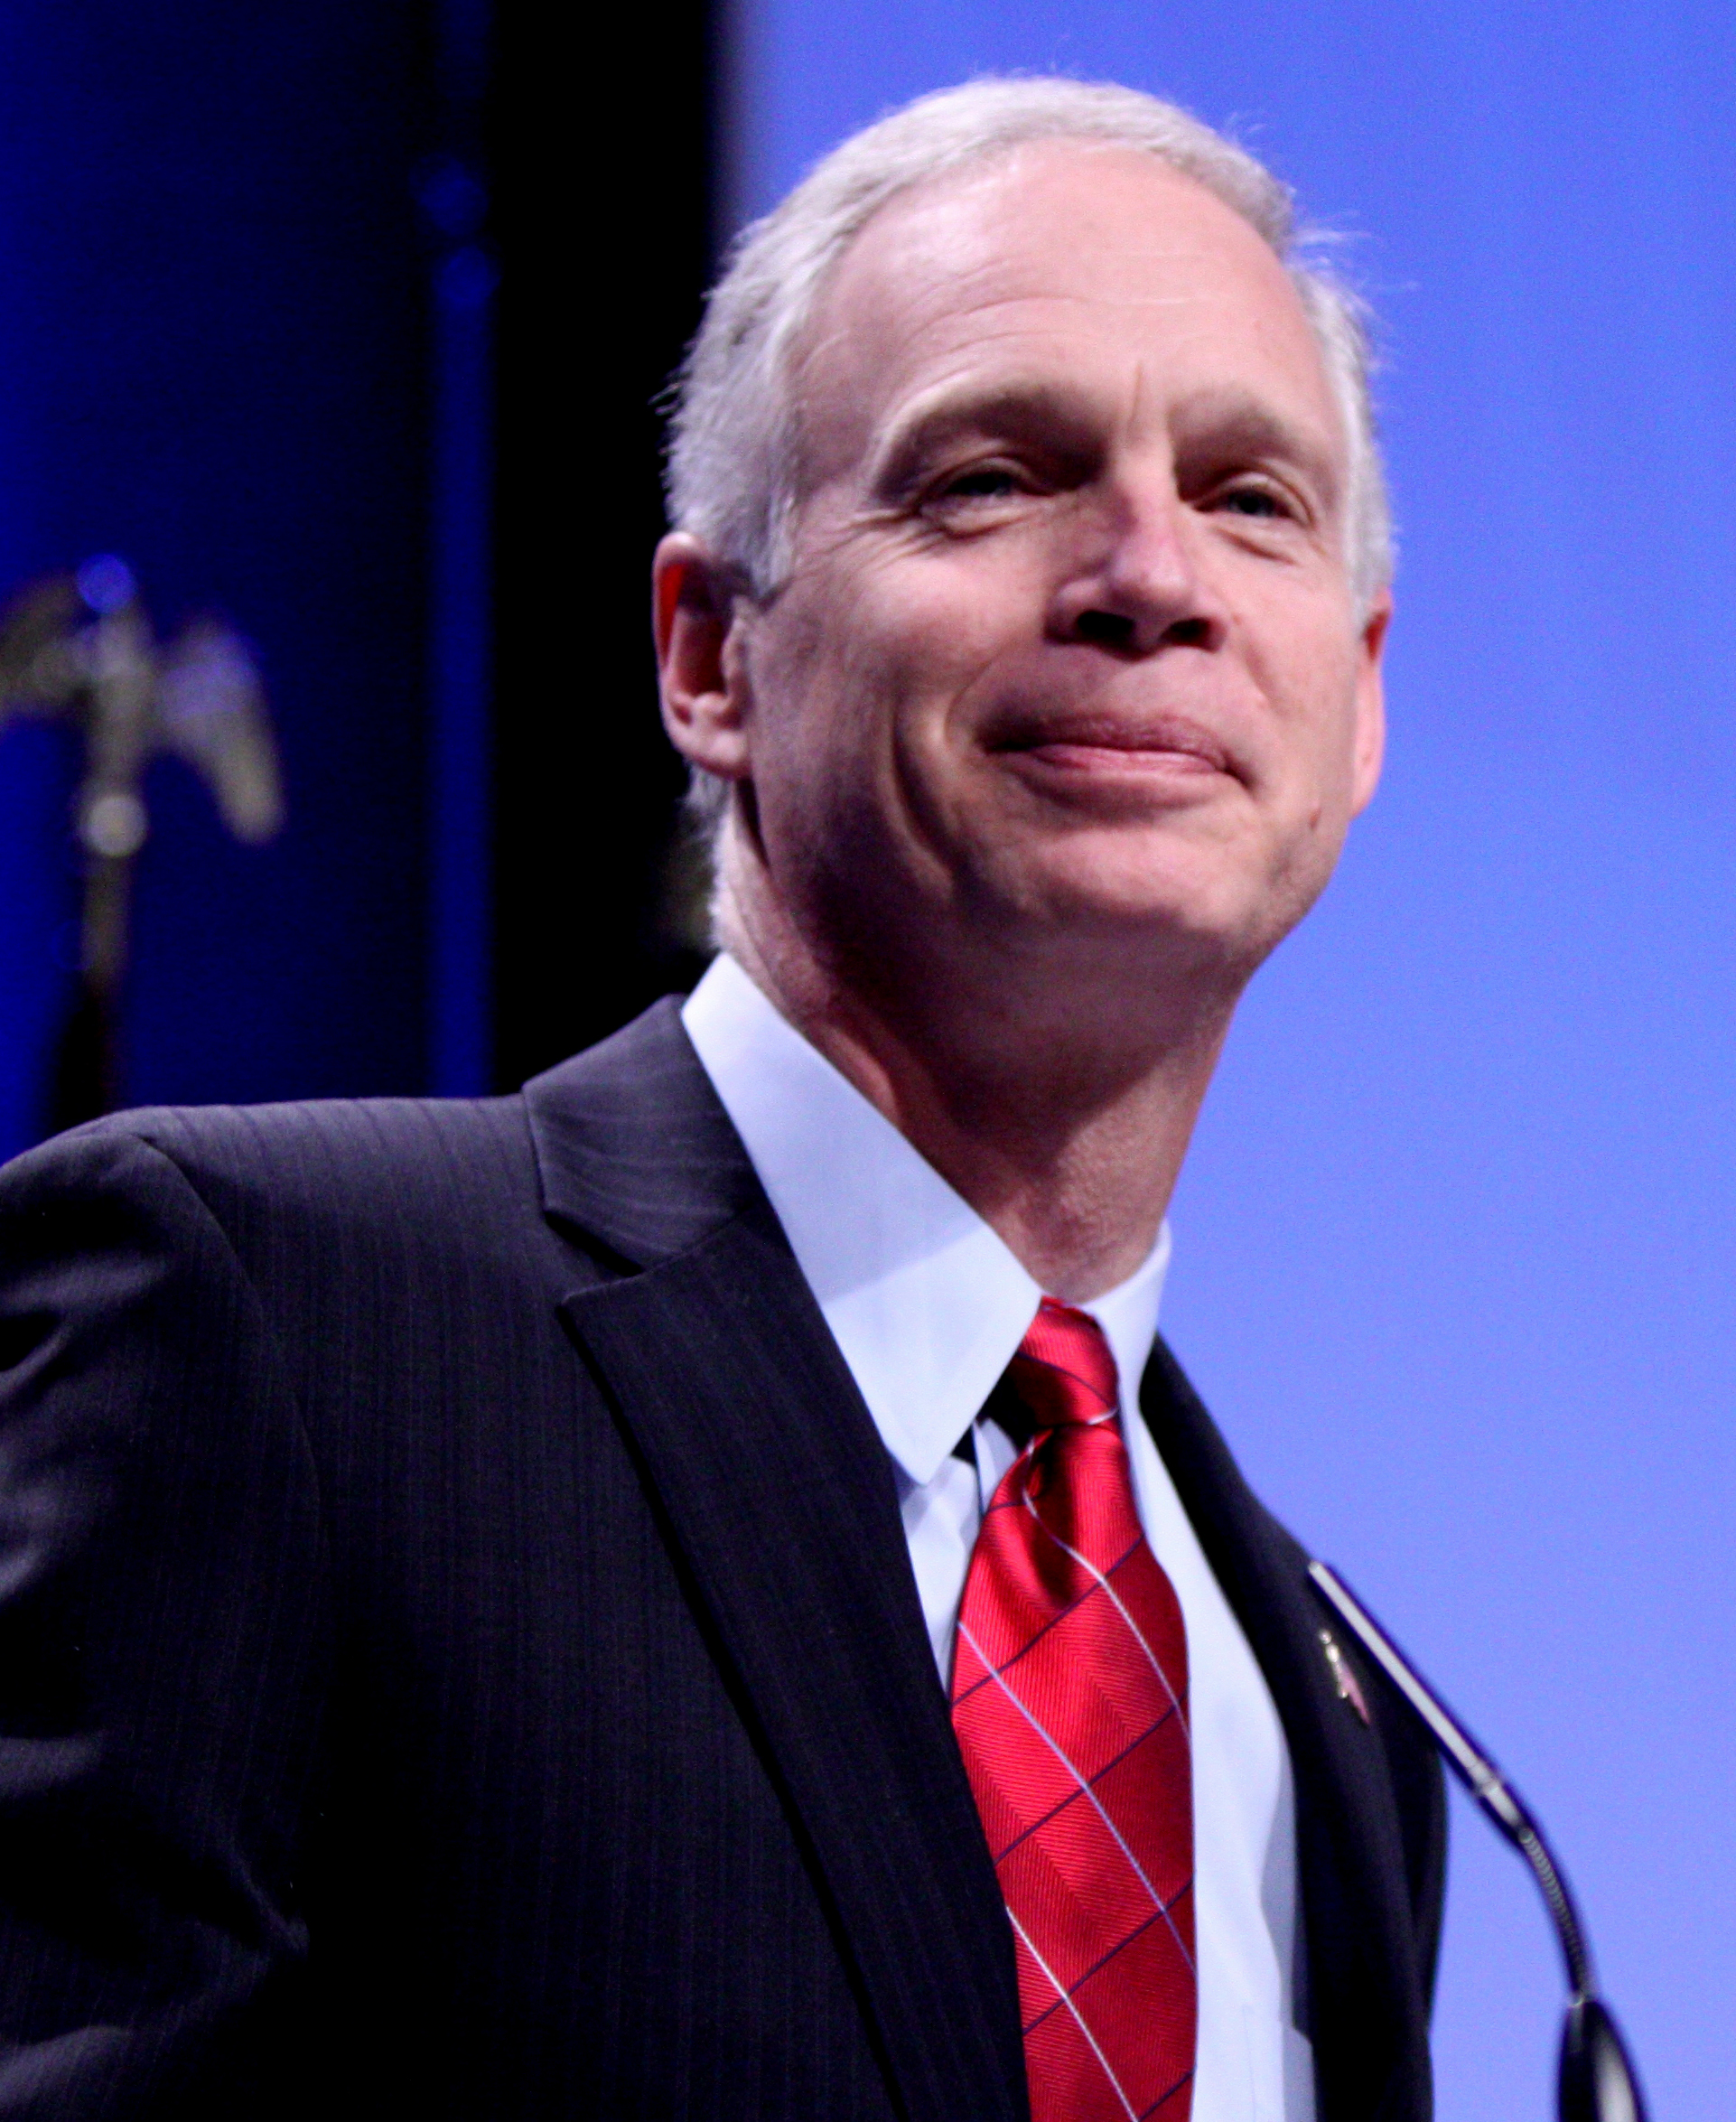 Ron Johnson Defends DeJoy, Accuses Dems Of "Character Assassination"